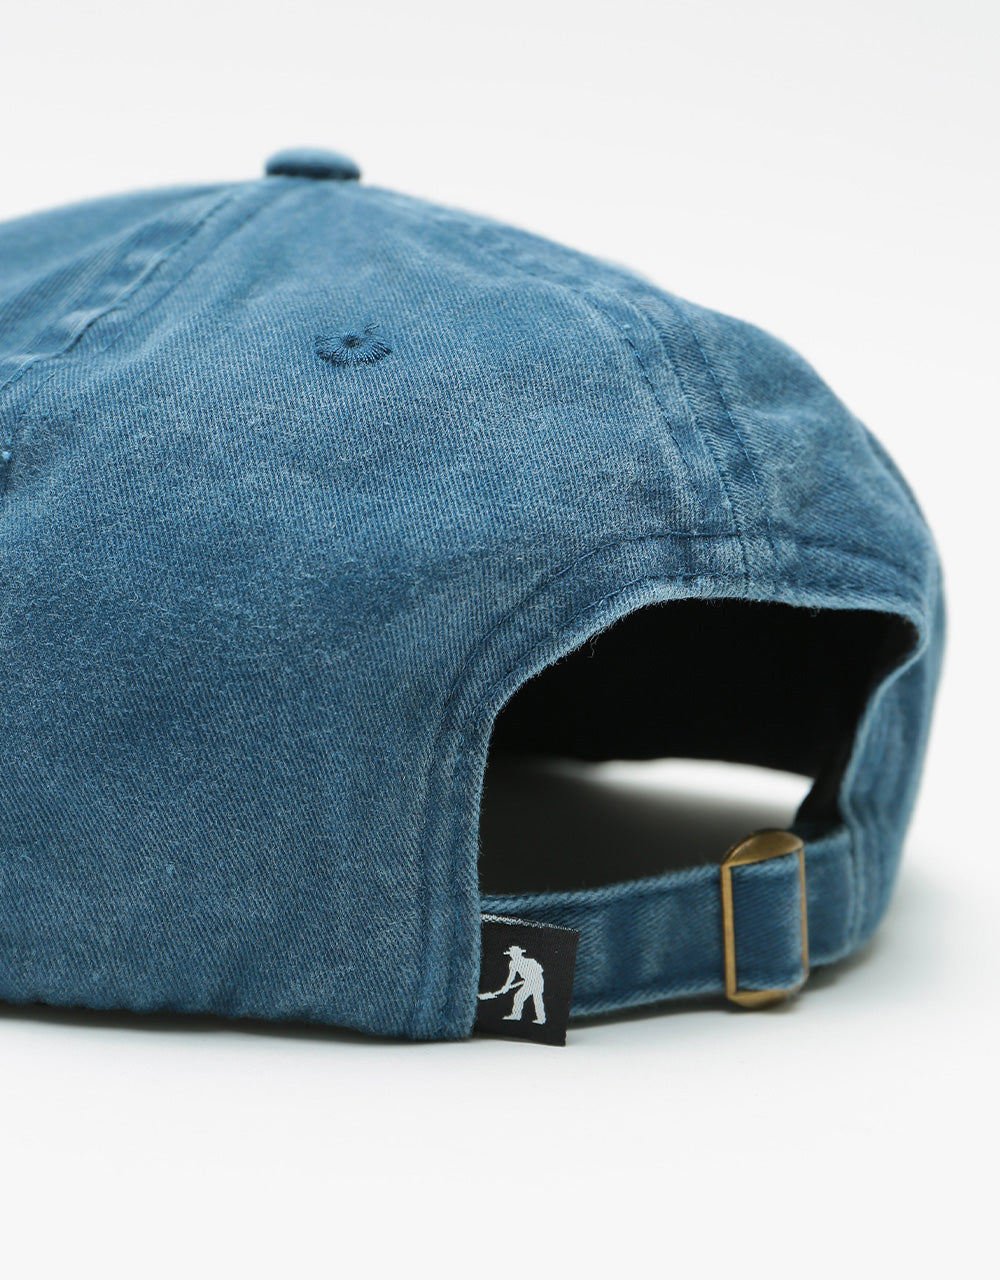 Pass Port Arched 6 Panel Cap - Navy